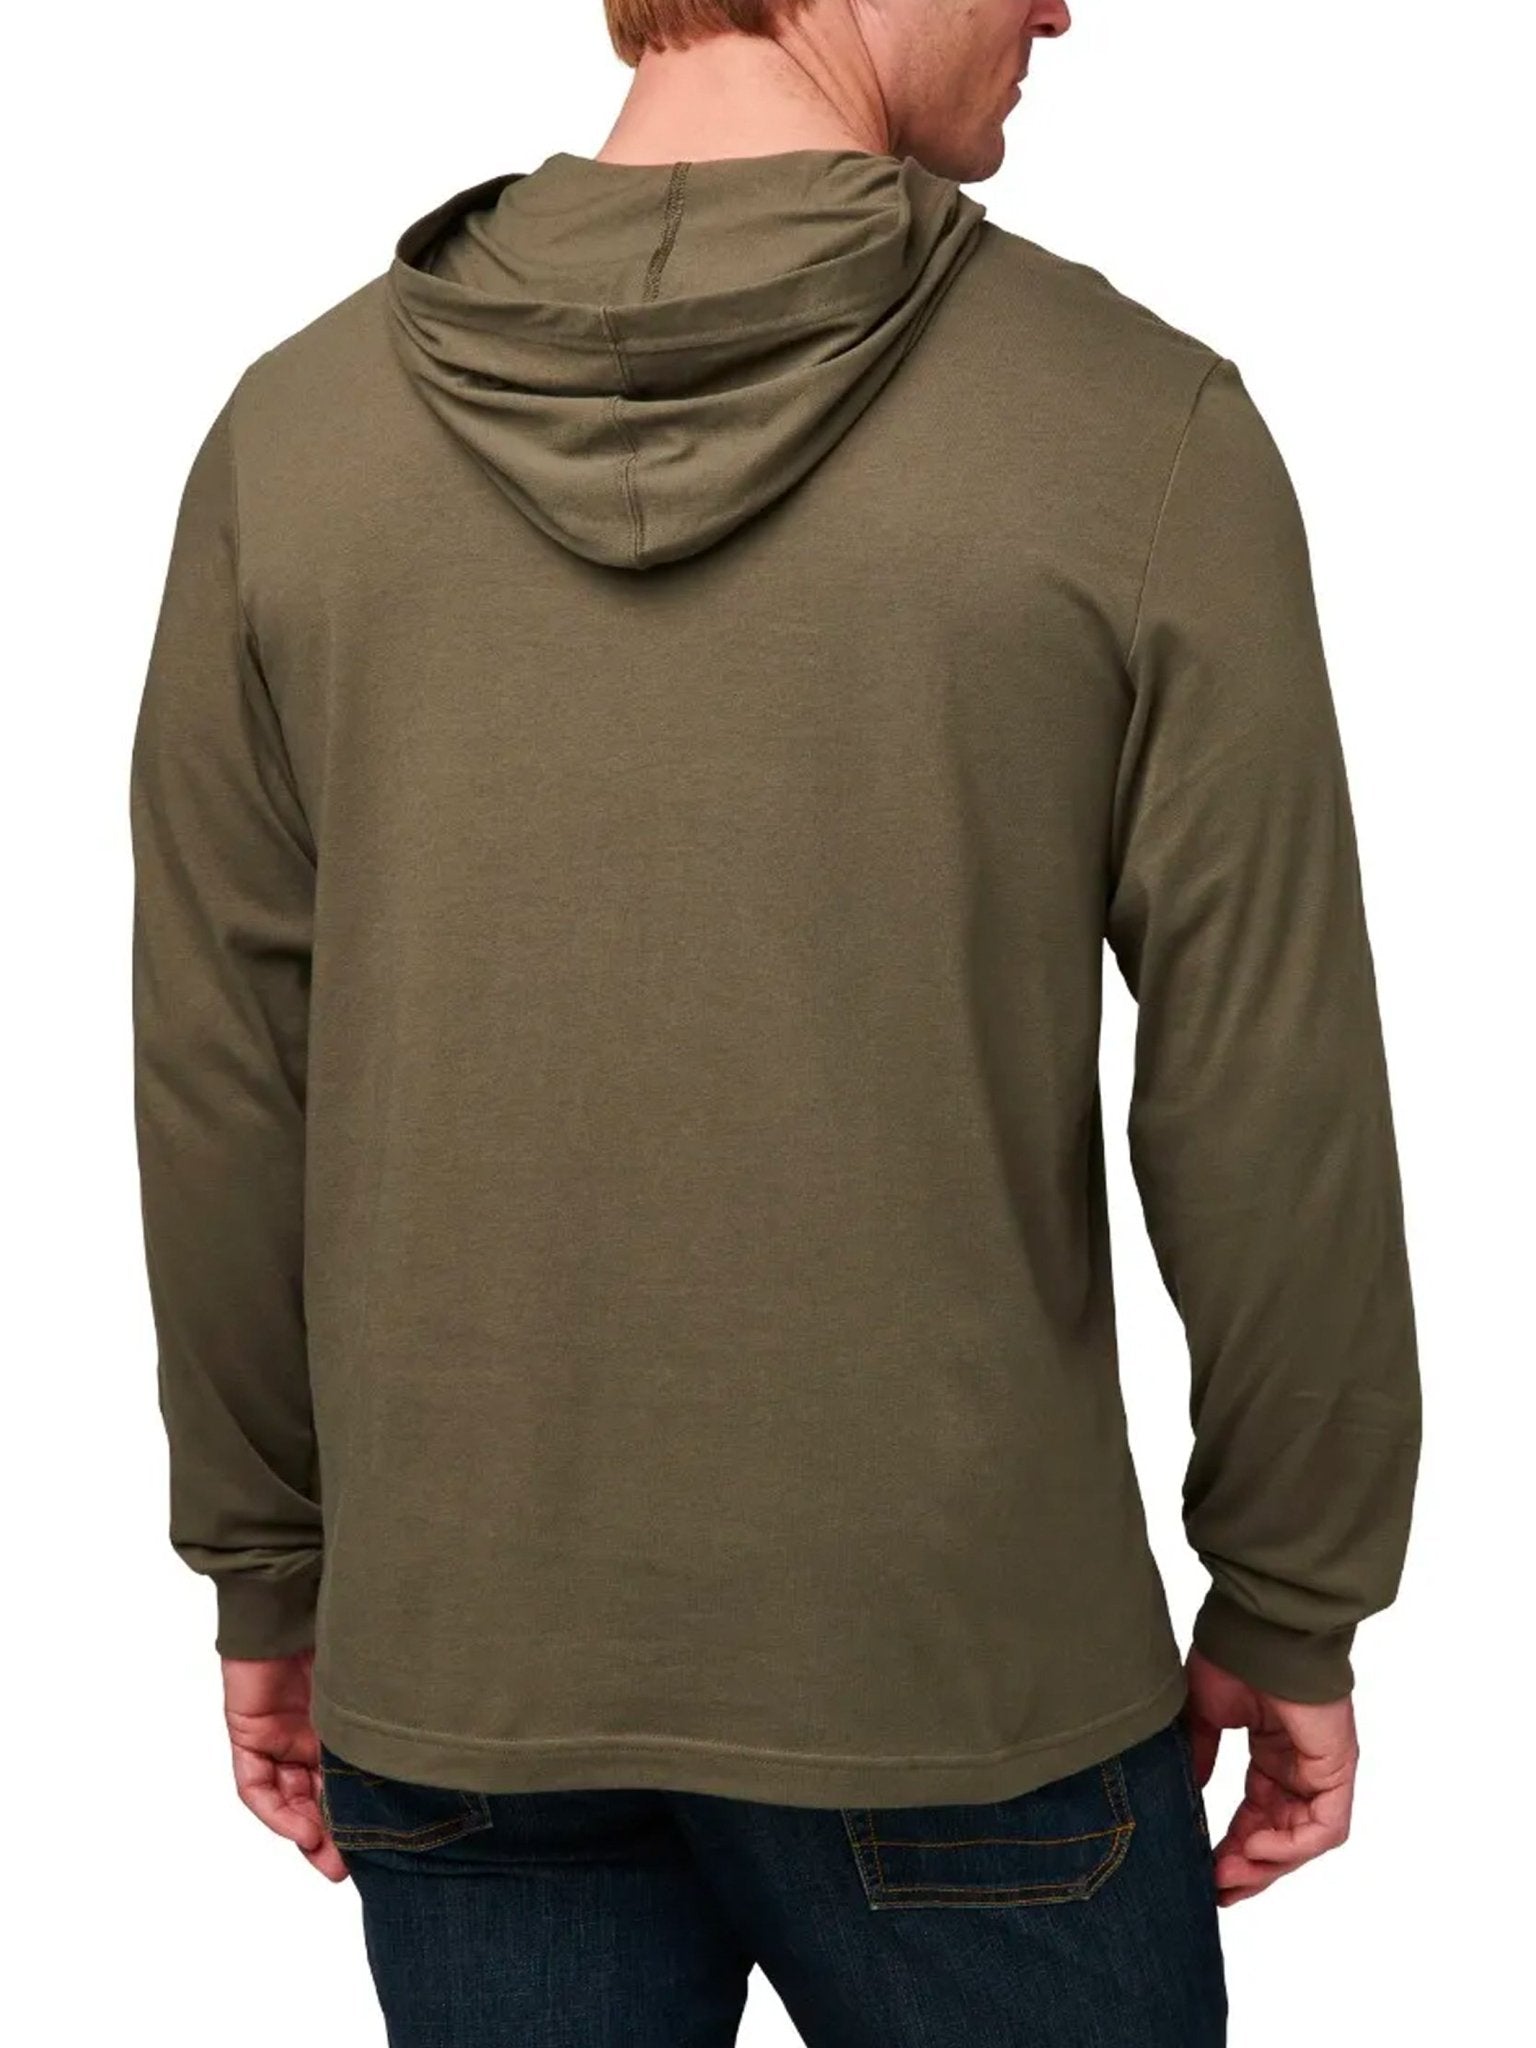 4elementsclothing5.11 Tactical5.11 Tactical - 5.11 HOODED LONG SLEEVE TEE Cotton Polyester moisture wicking - Style 76165T-Shirt76165-721-S